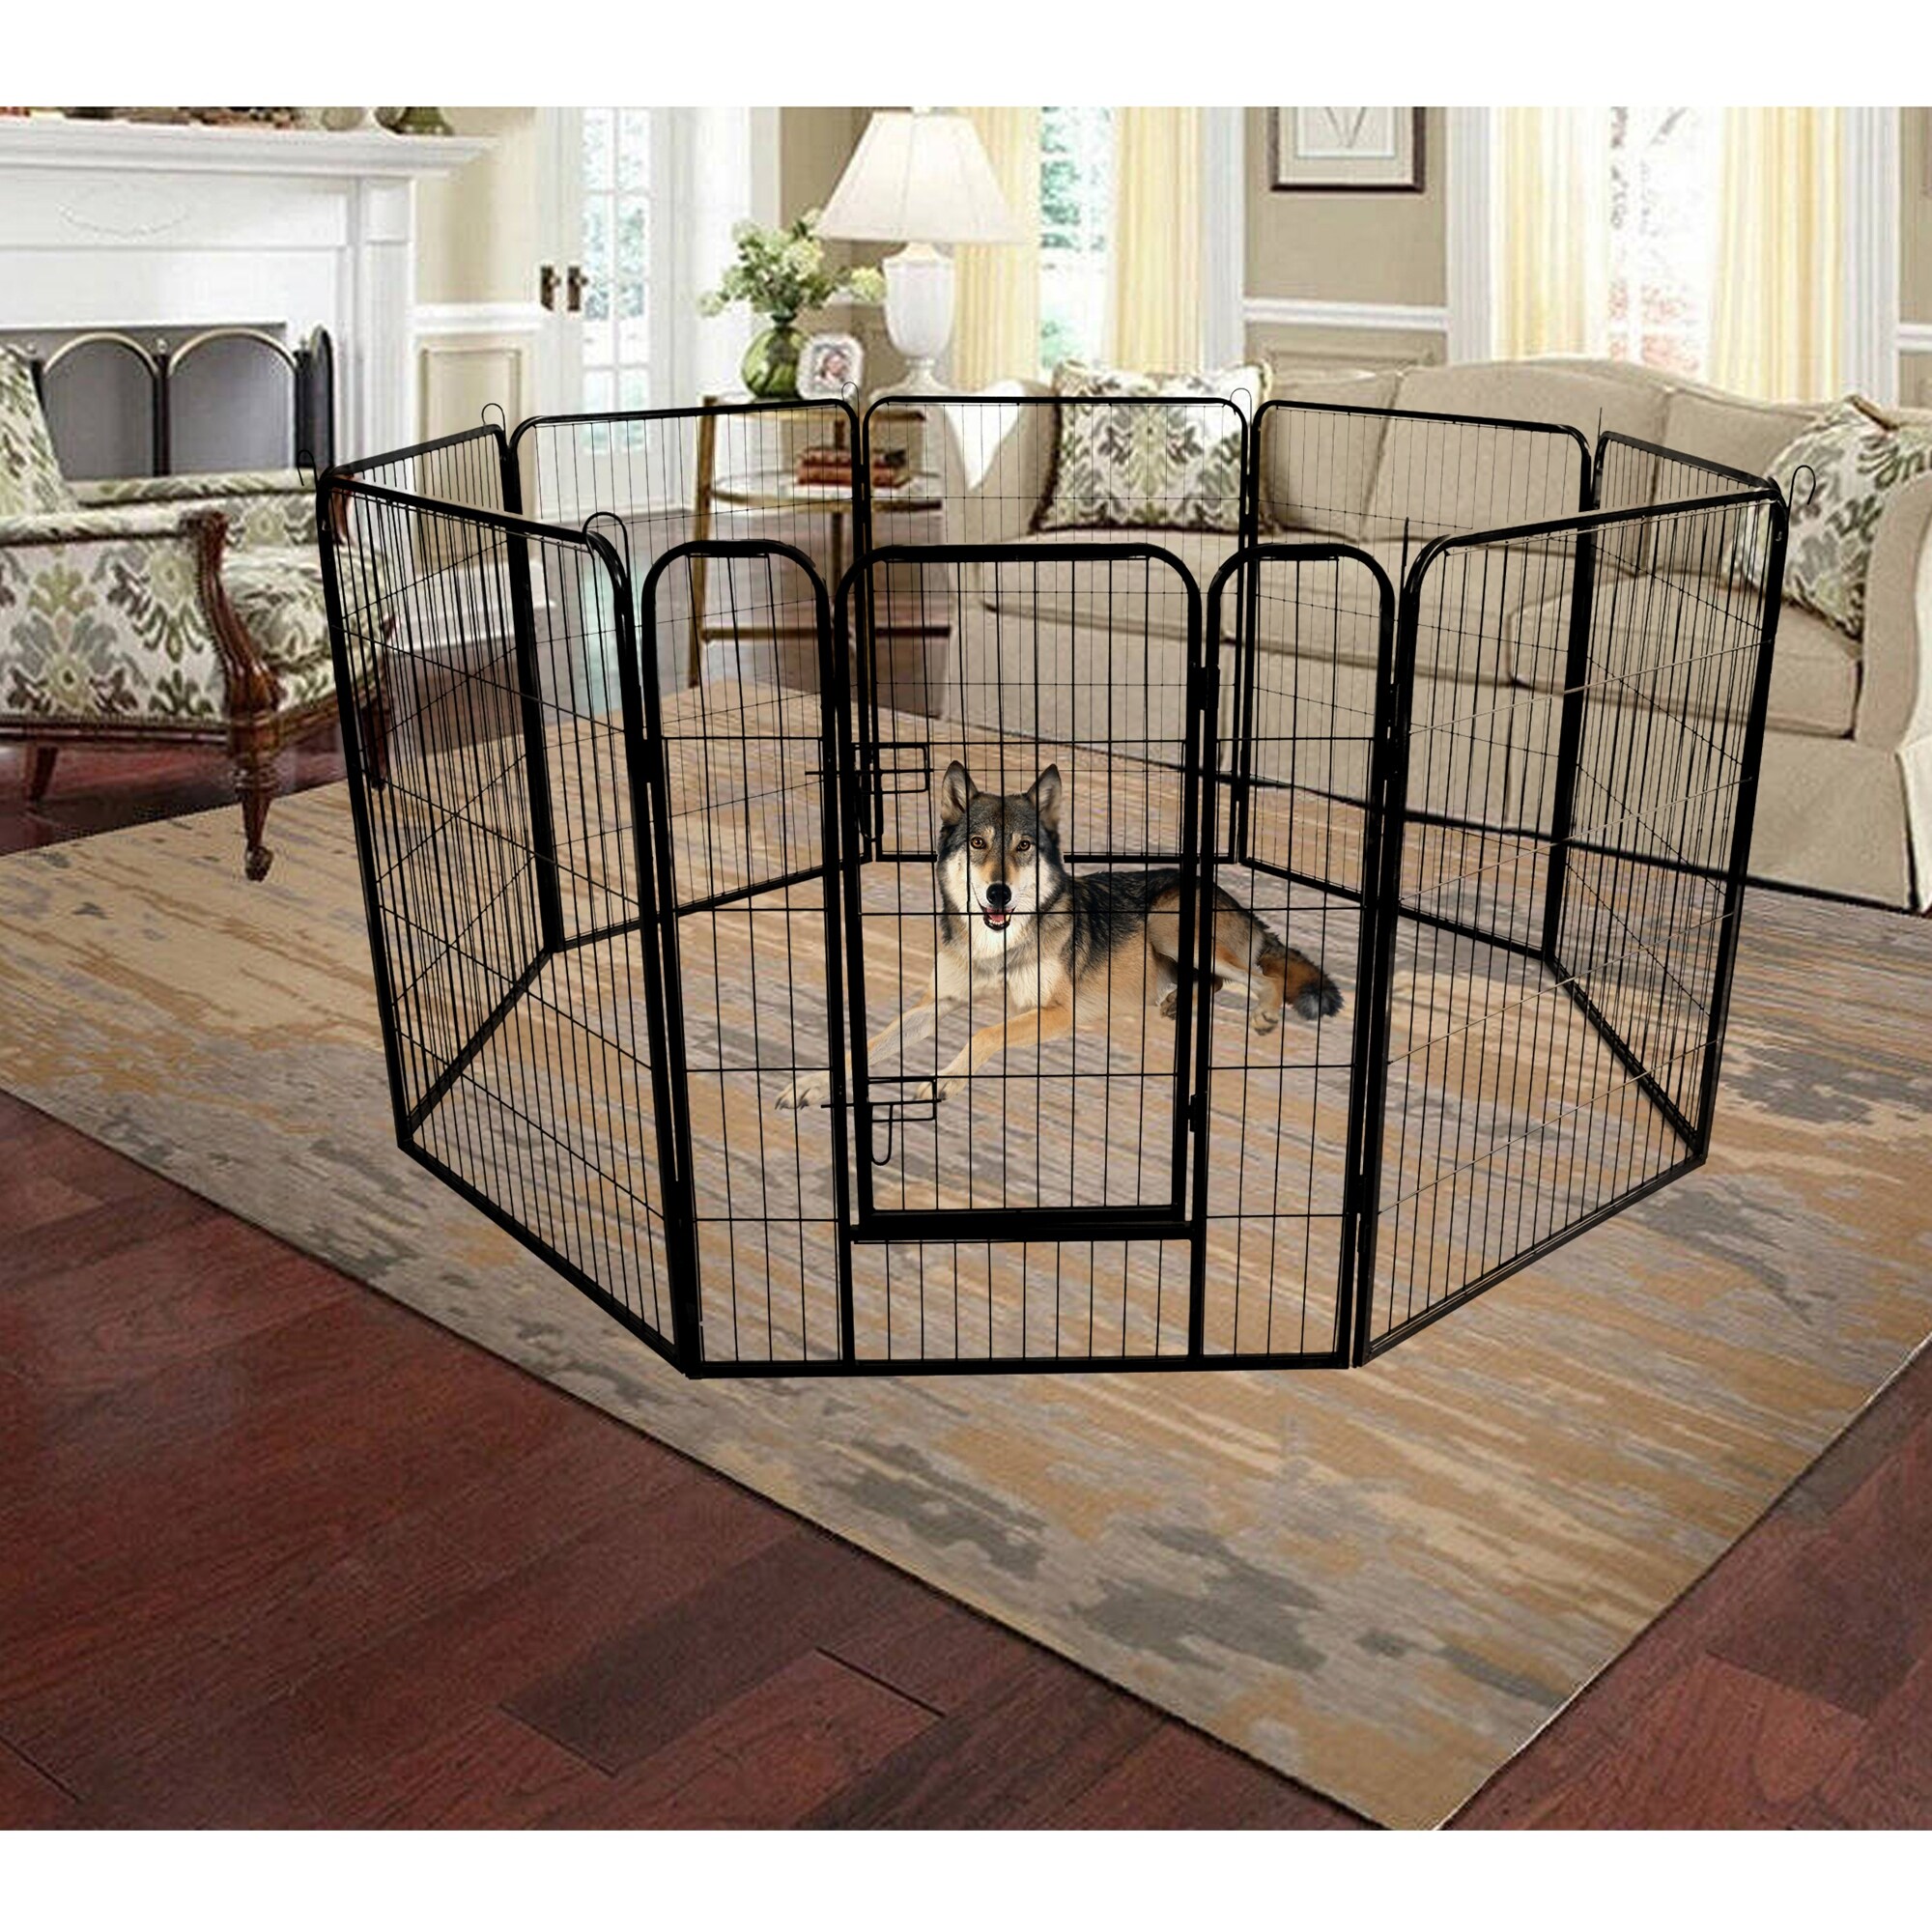 ESK COLLECTION Blue 45 Pet Puppy Dog Playpen Exercise Pen Kennel 600d Oxford Cloth 48 Inch ESK48-Blue